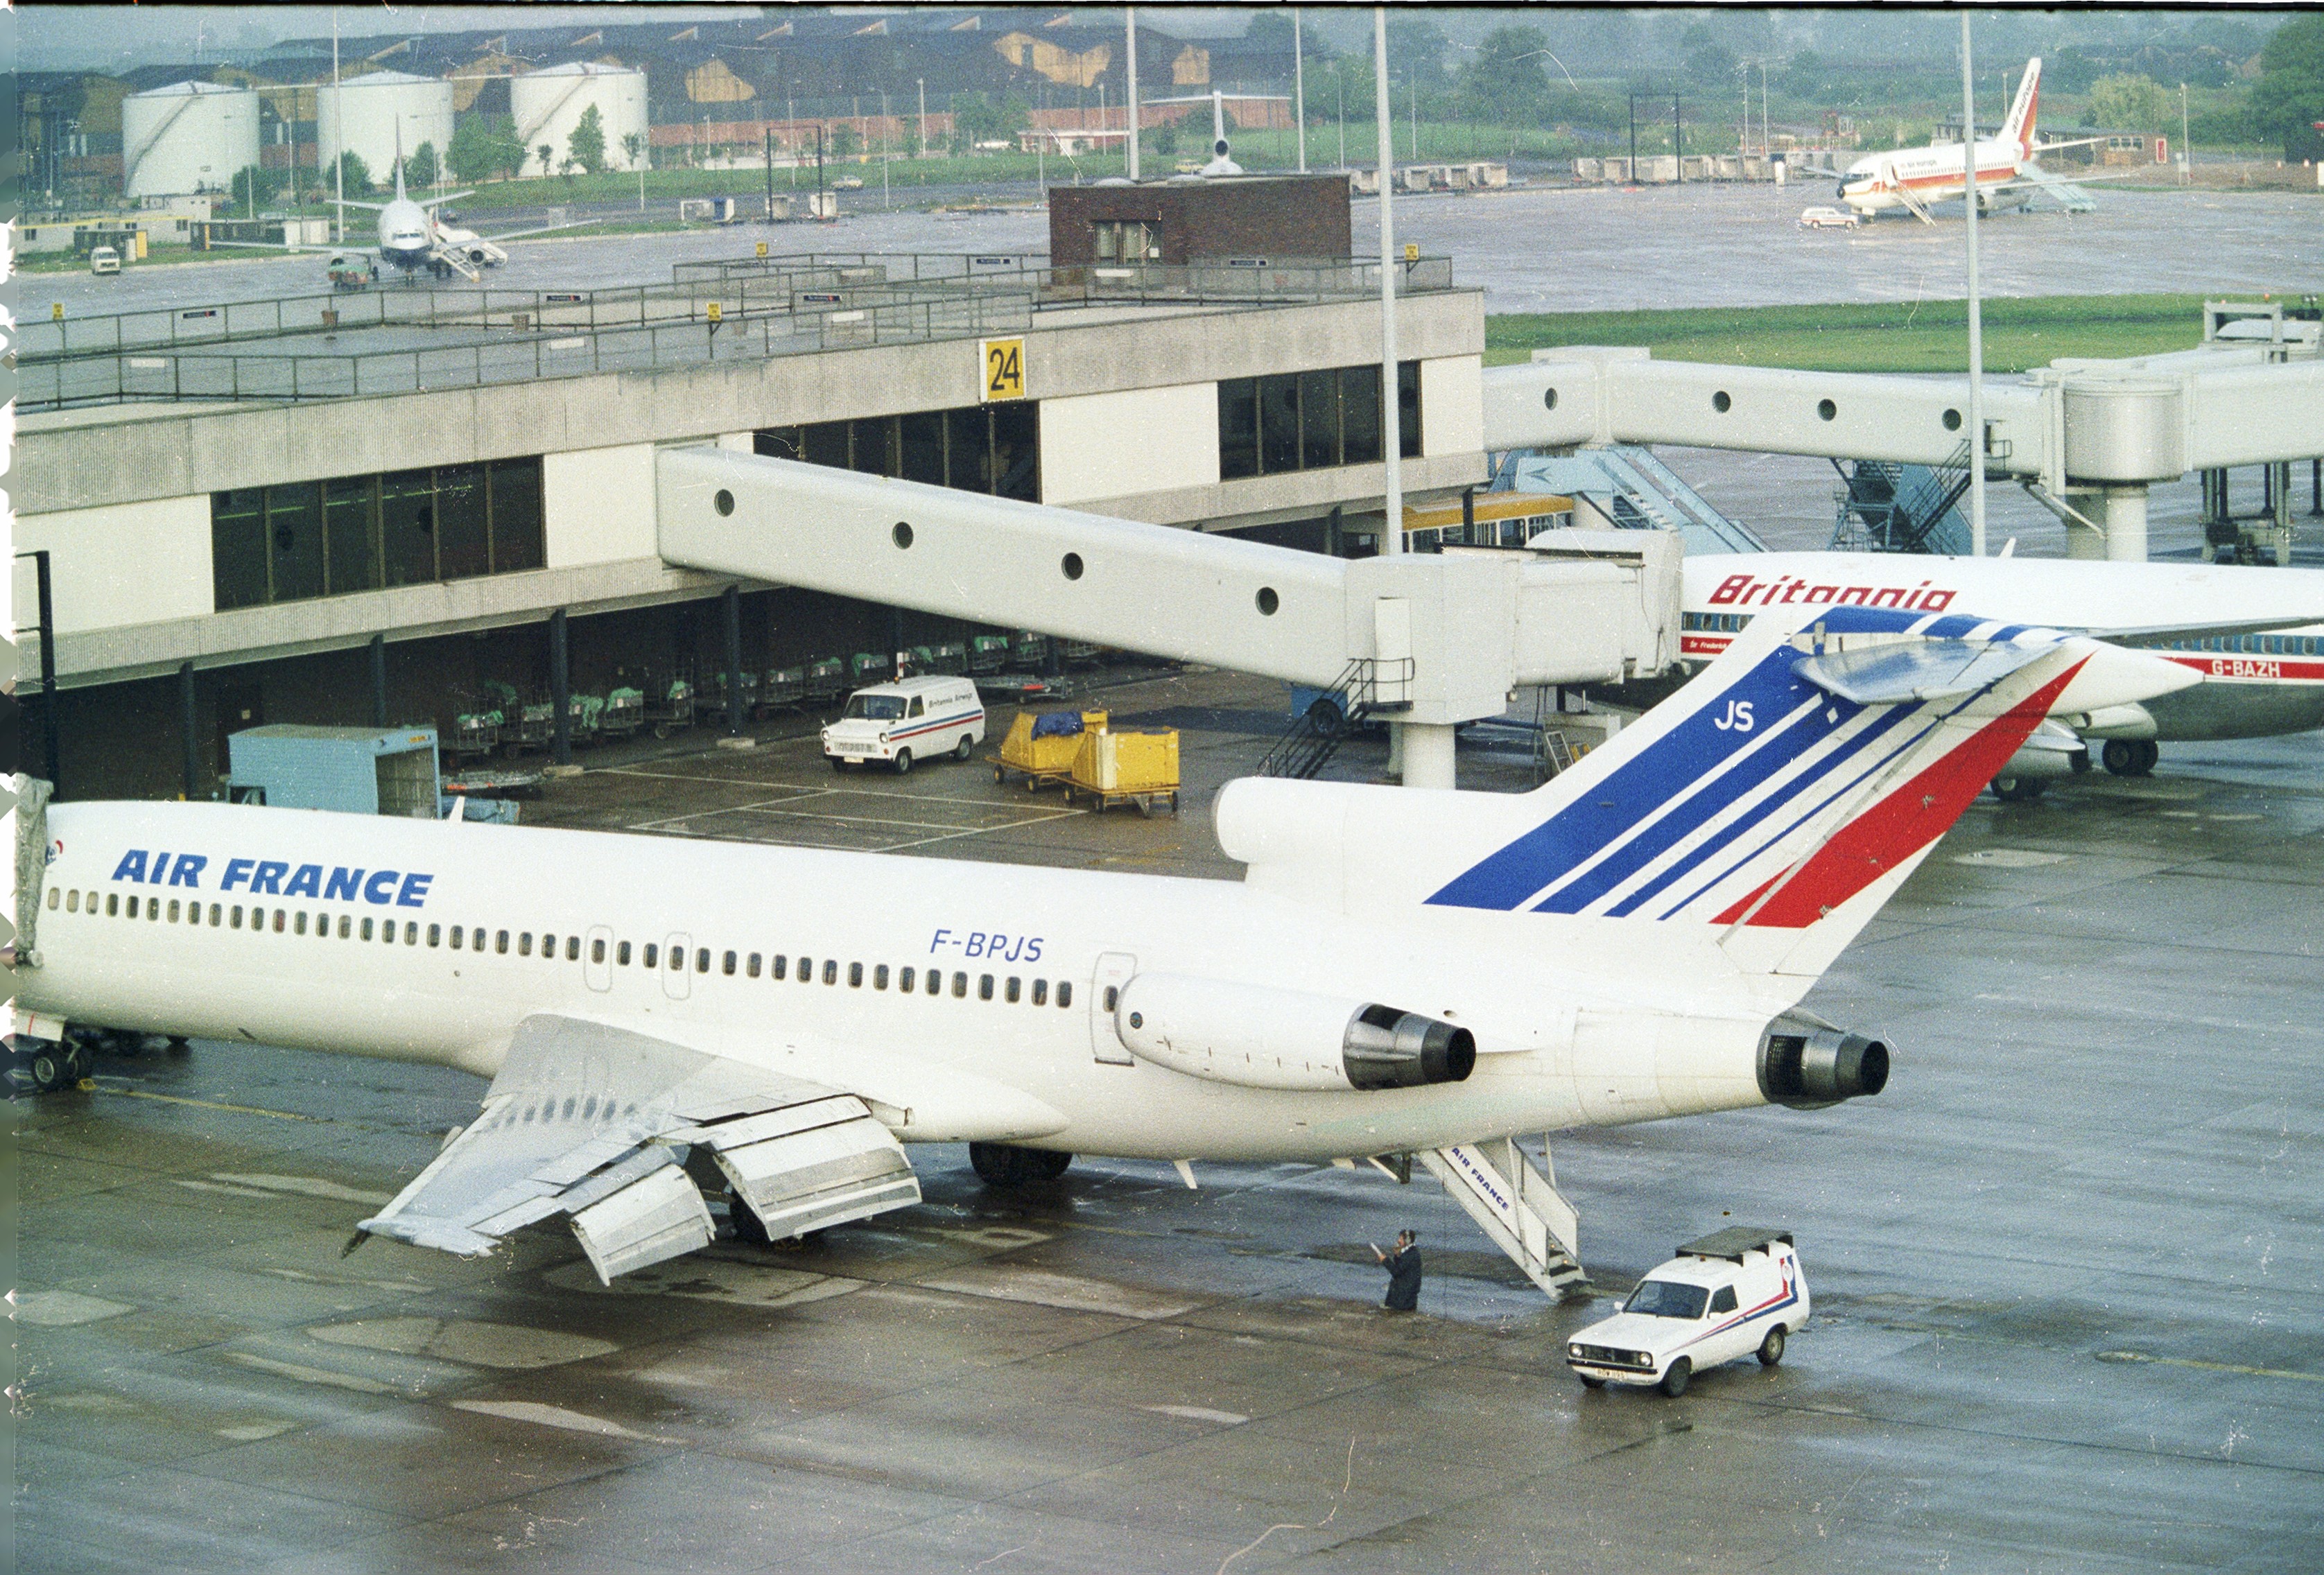 File:Boeing 727-228, F-BPJS Air France, Manchester, July ...